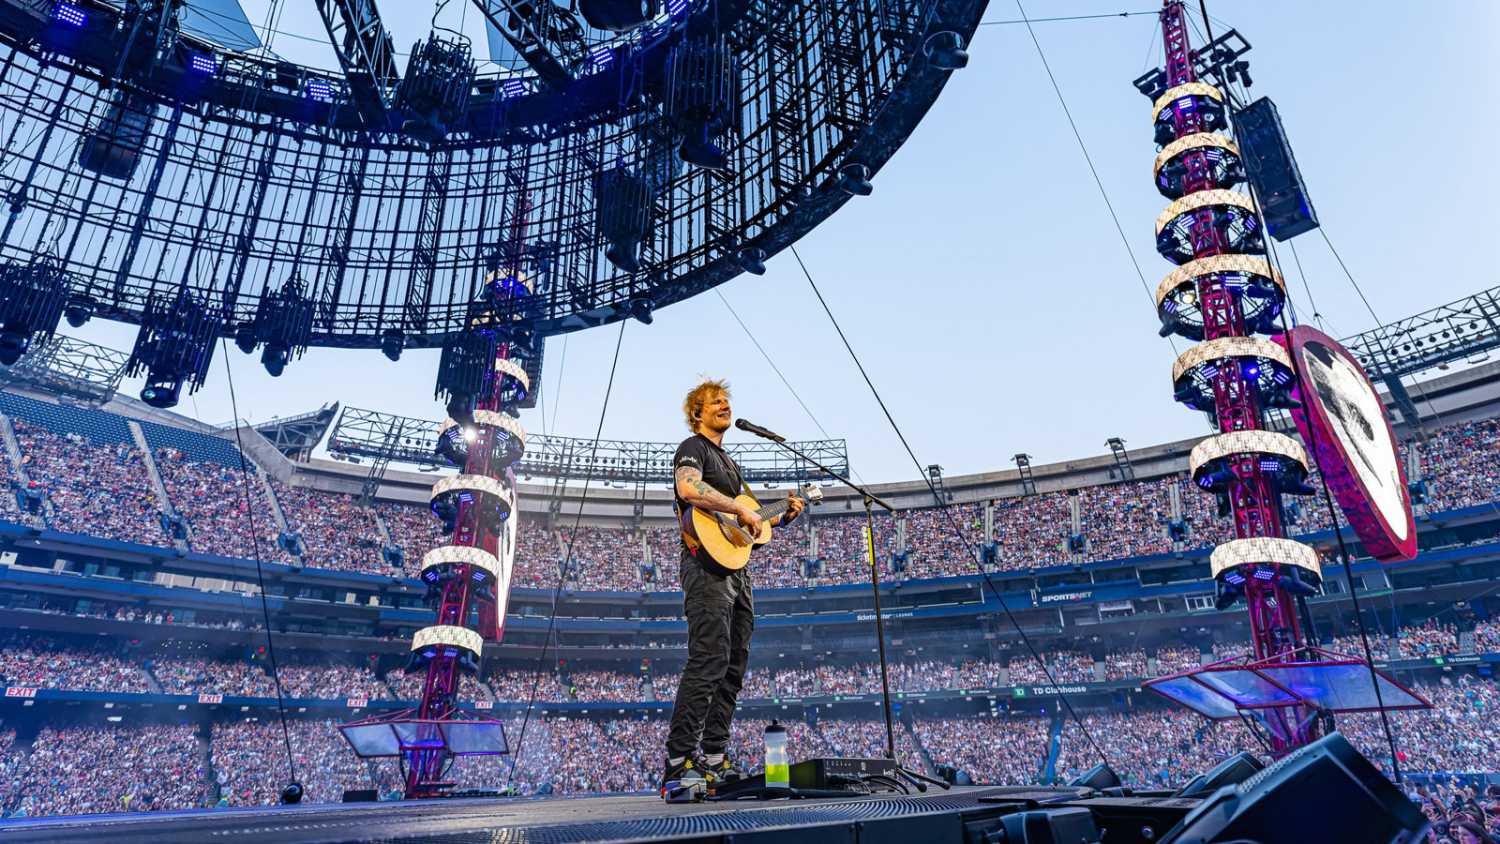 By the end of the North American leg, Ed Sheeran’s Mathematics tour will have logged 89 shows in 49 cities